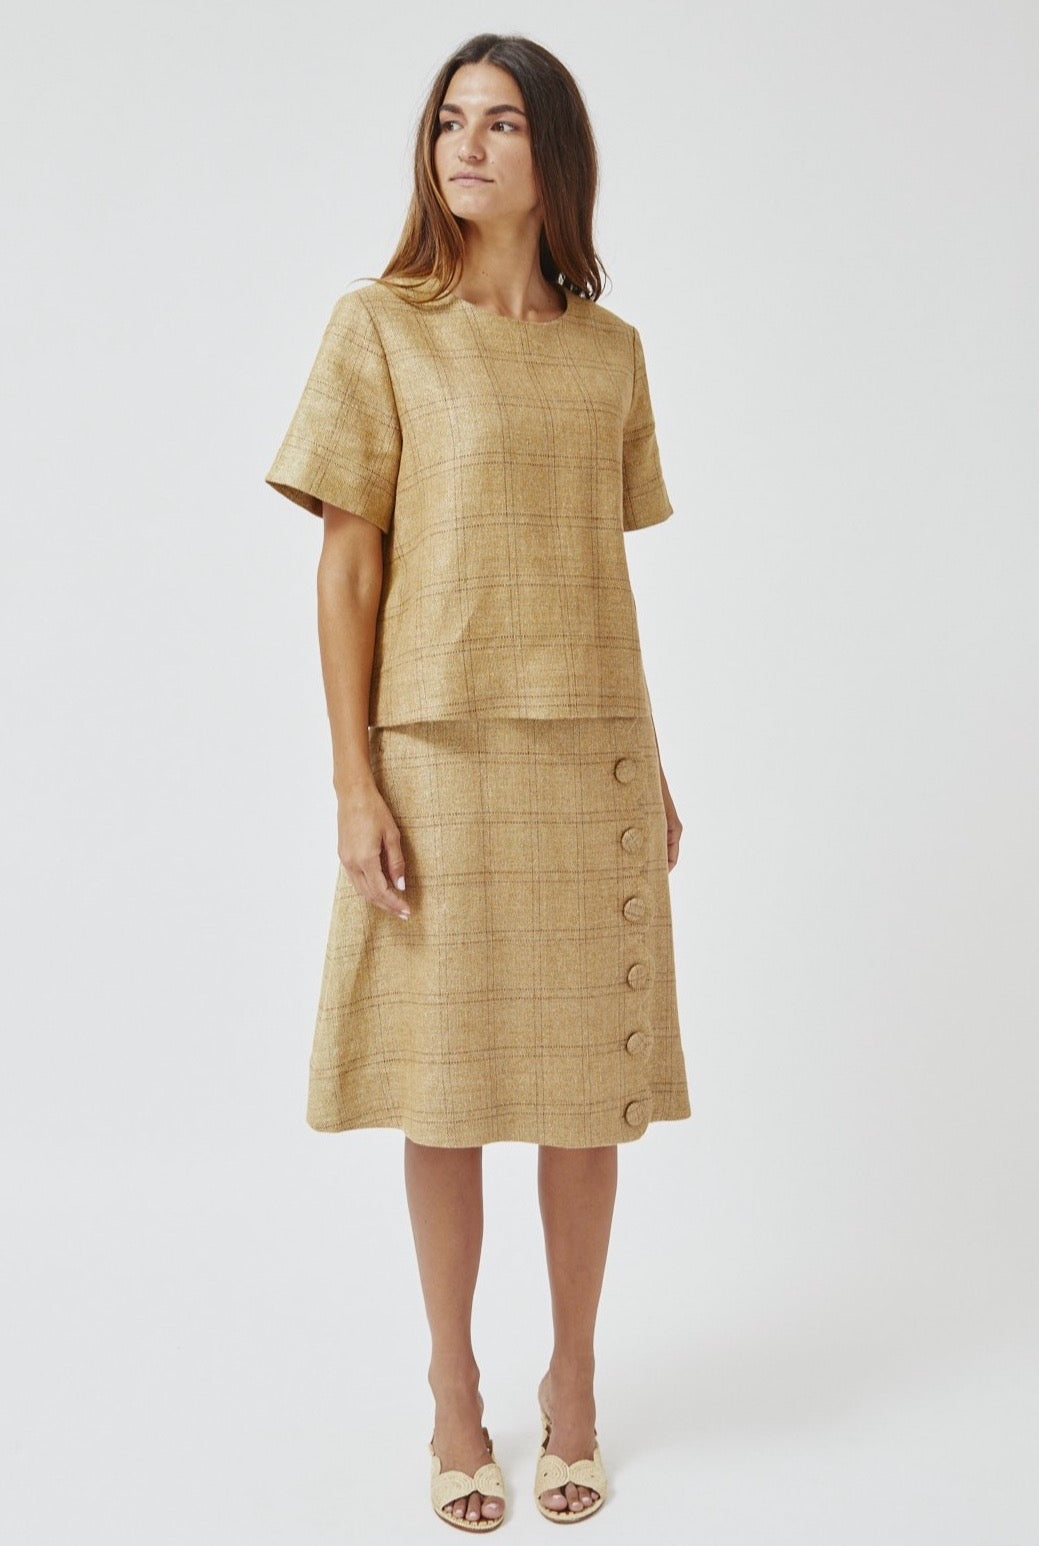 THE TRAPEZE T-SHIRT in NATURAL WINDOWPANE BASKETWEAVE LINEN